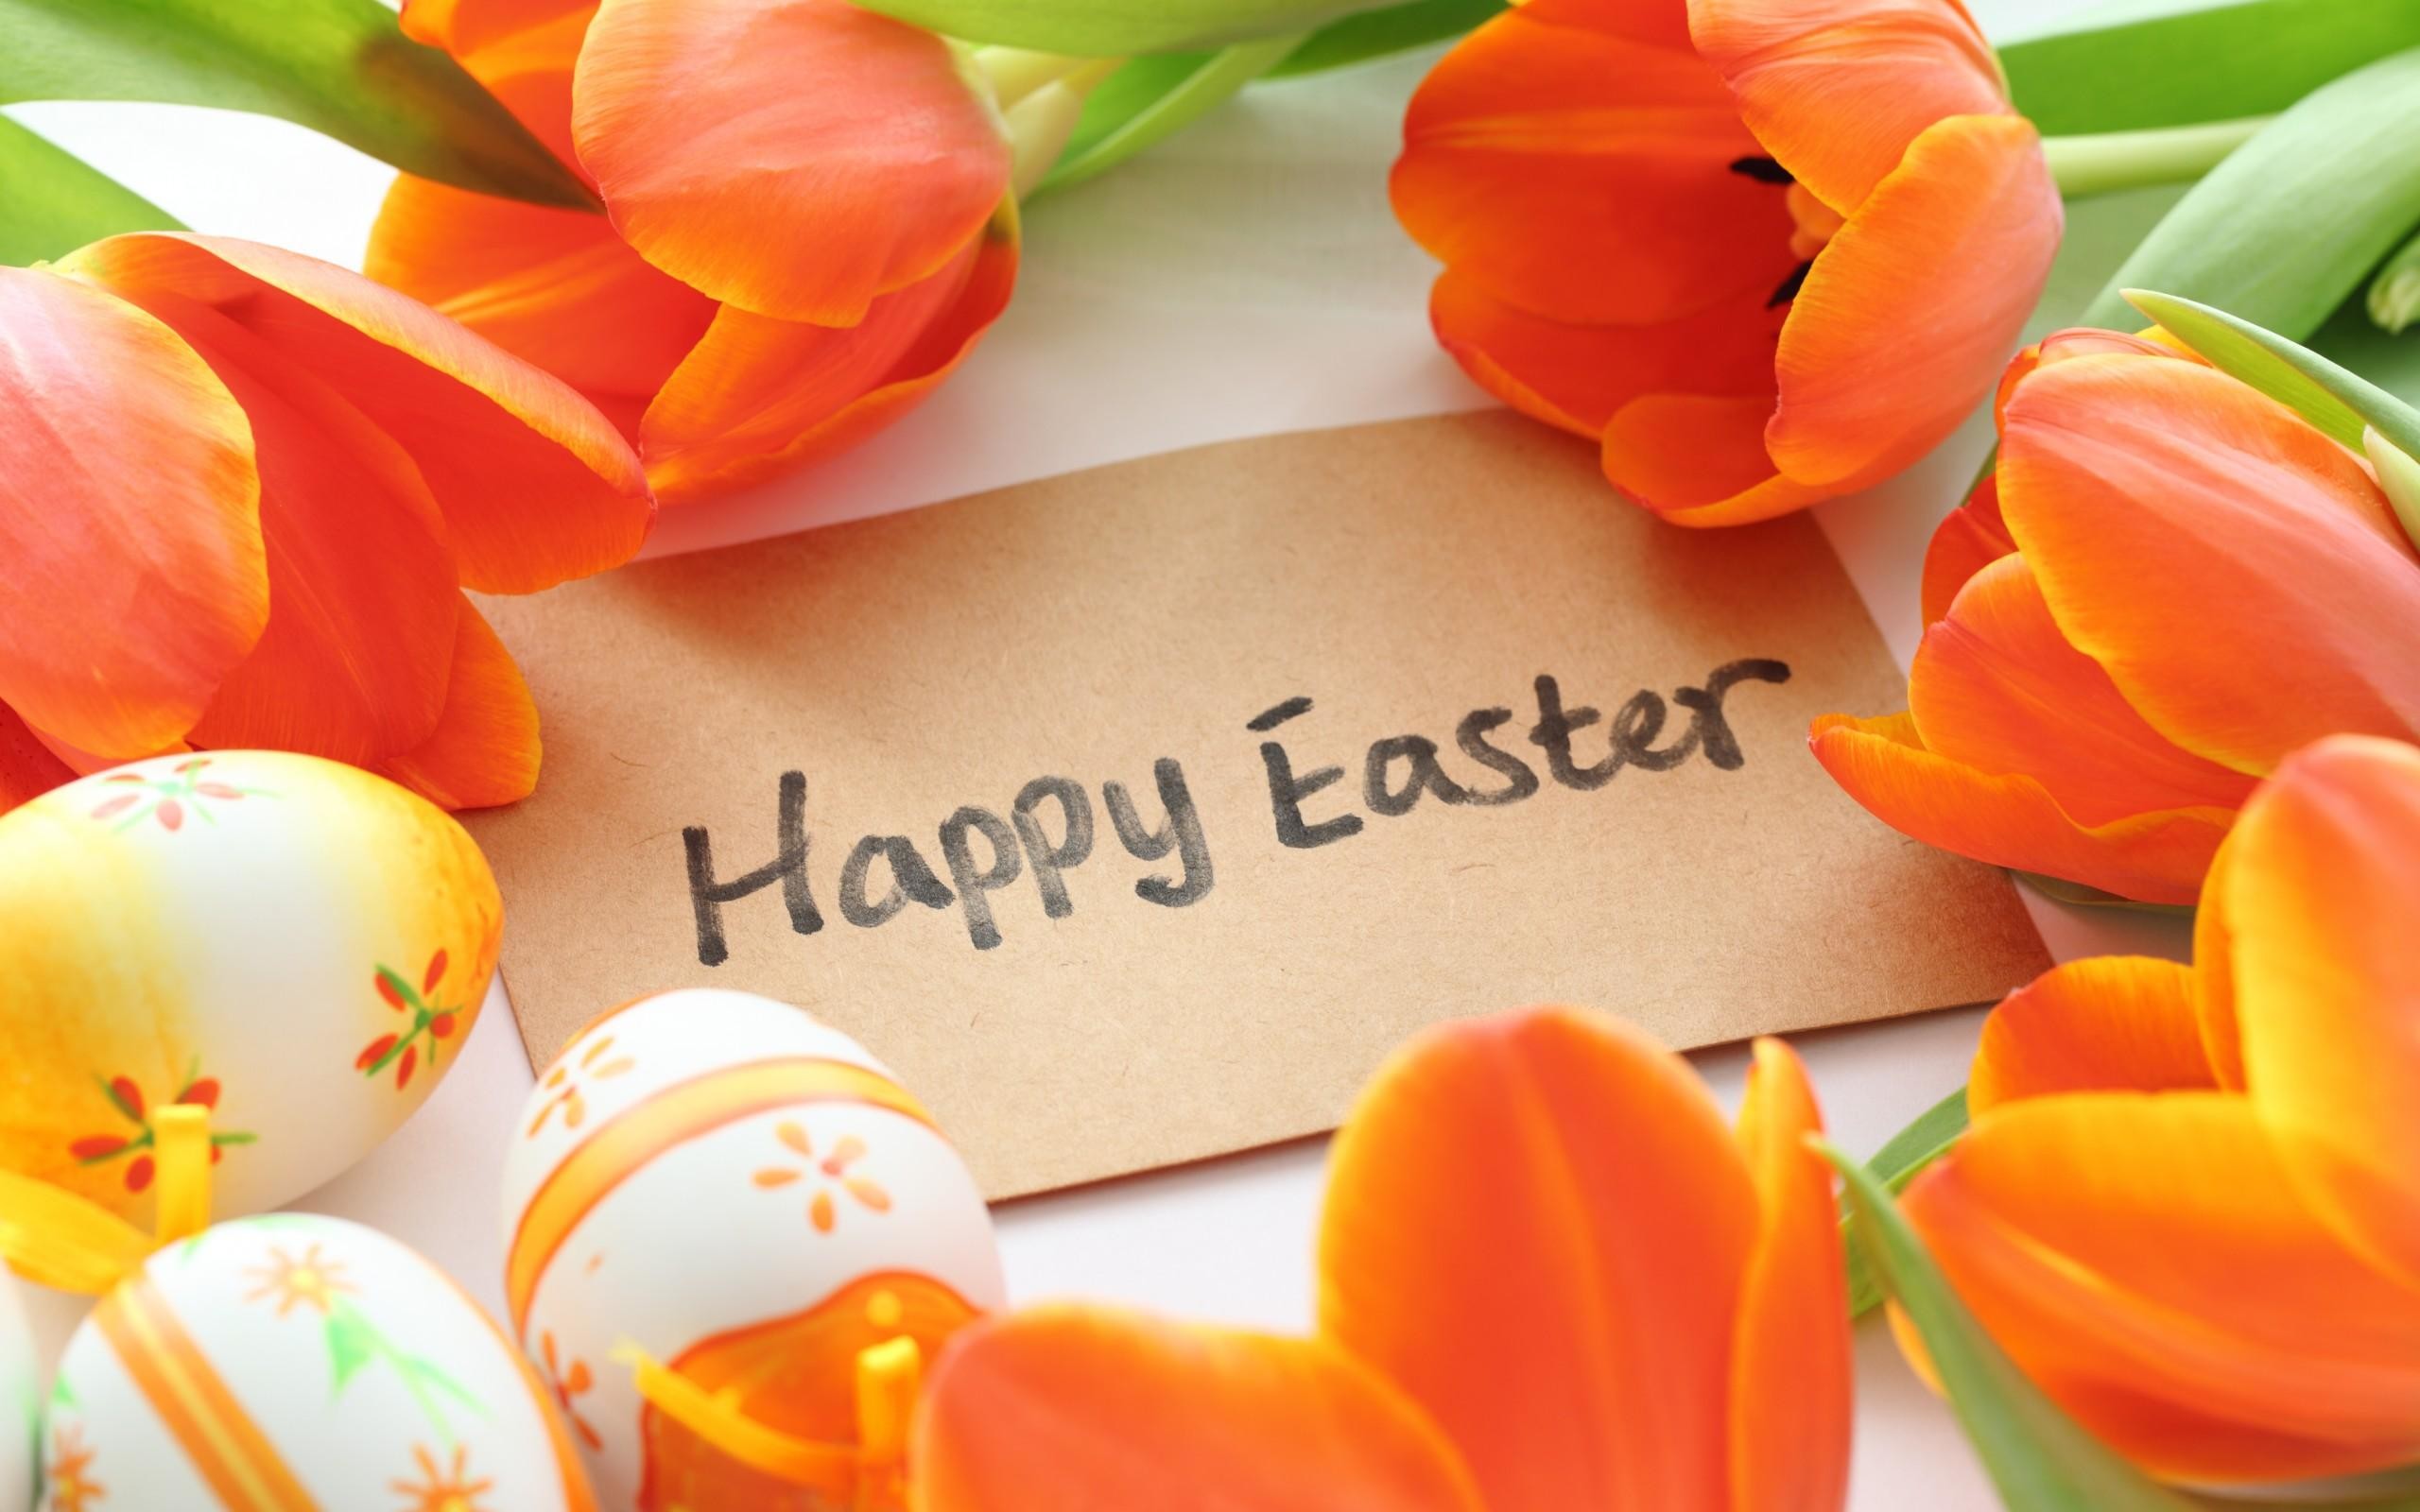 Happy Easter Wallpaper Pictures 63 images 2560x1600